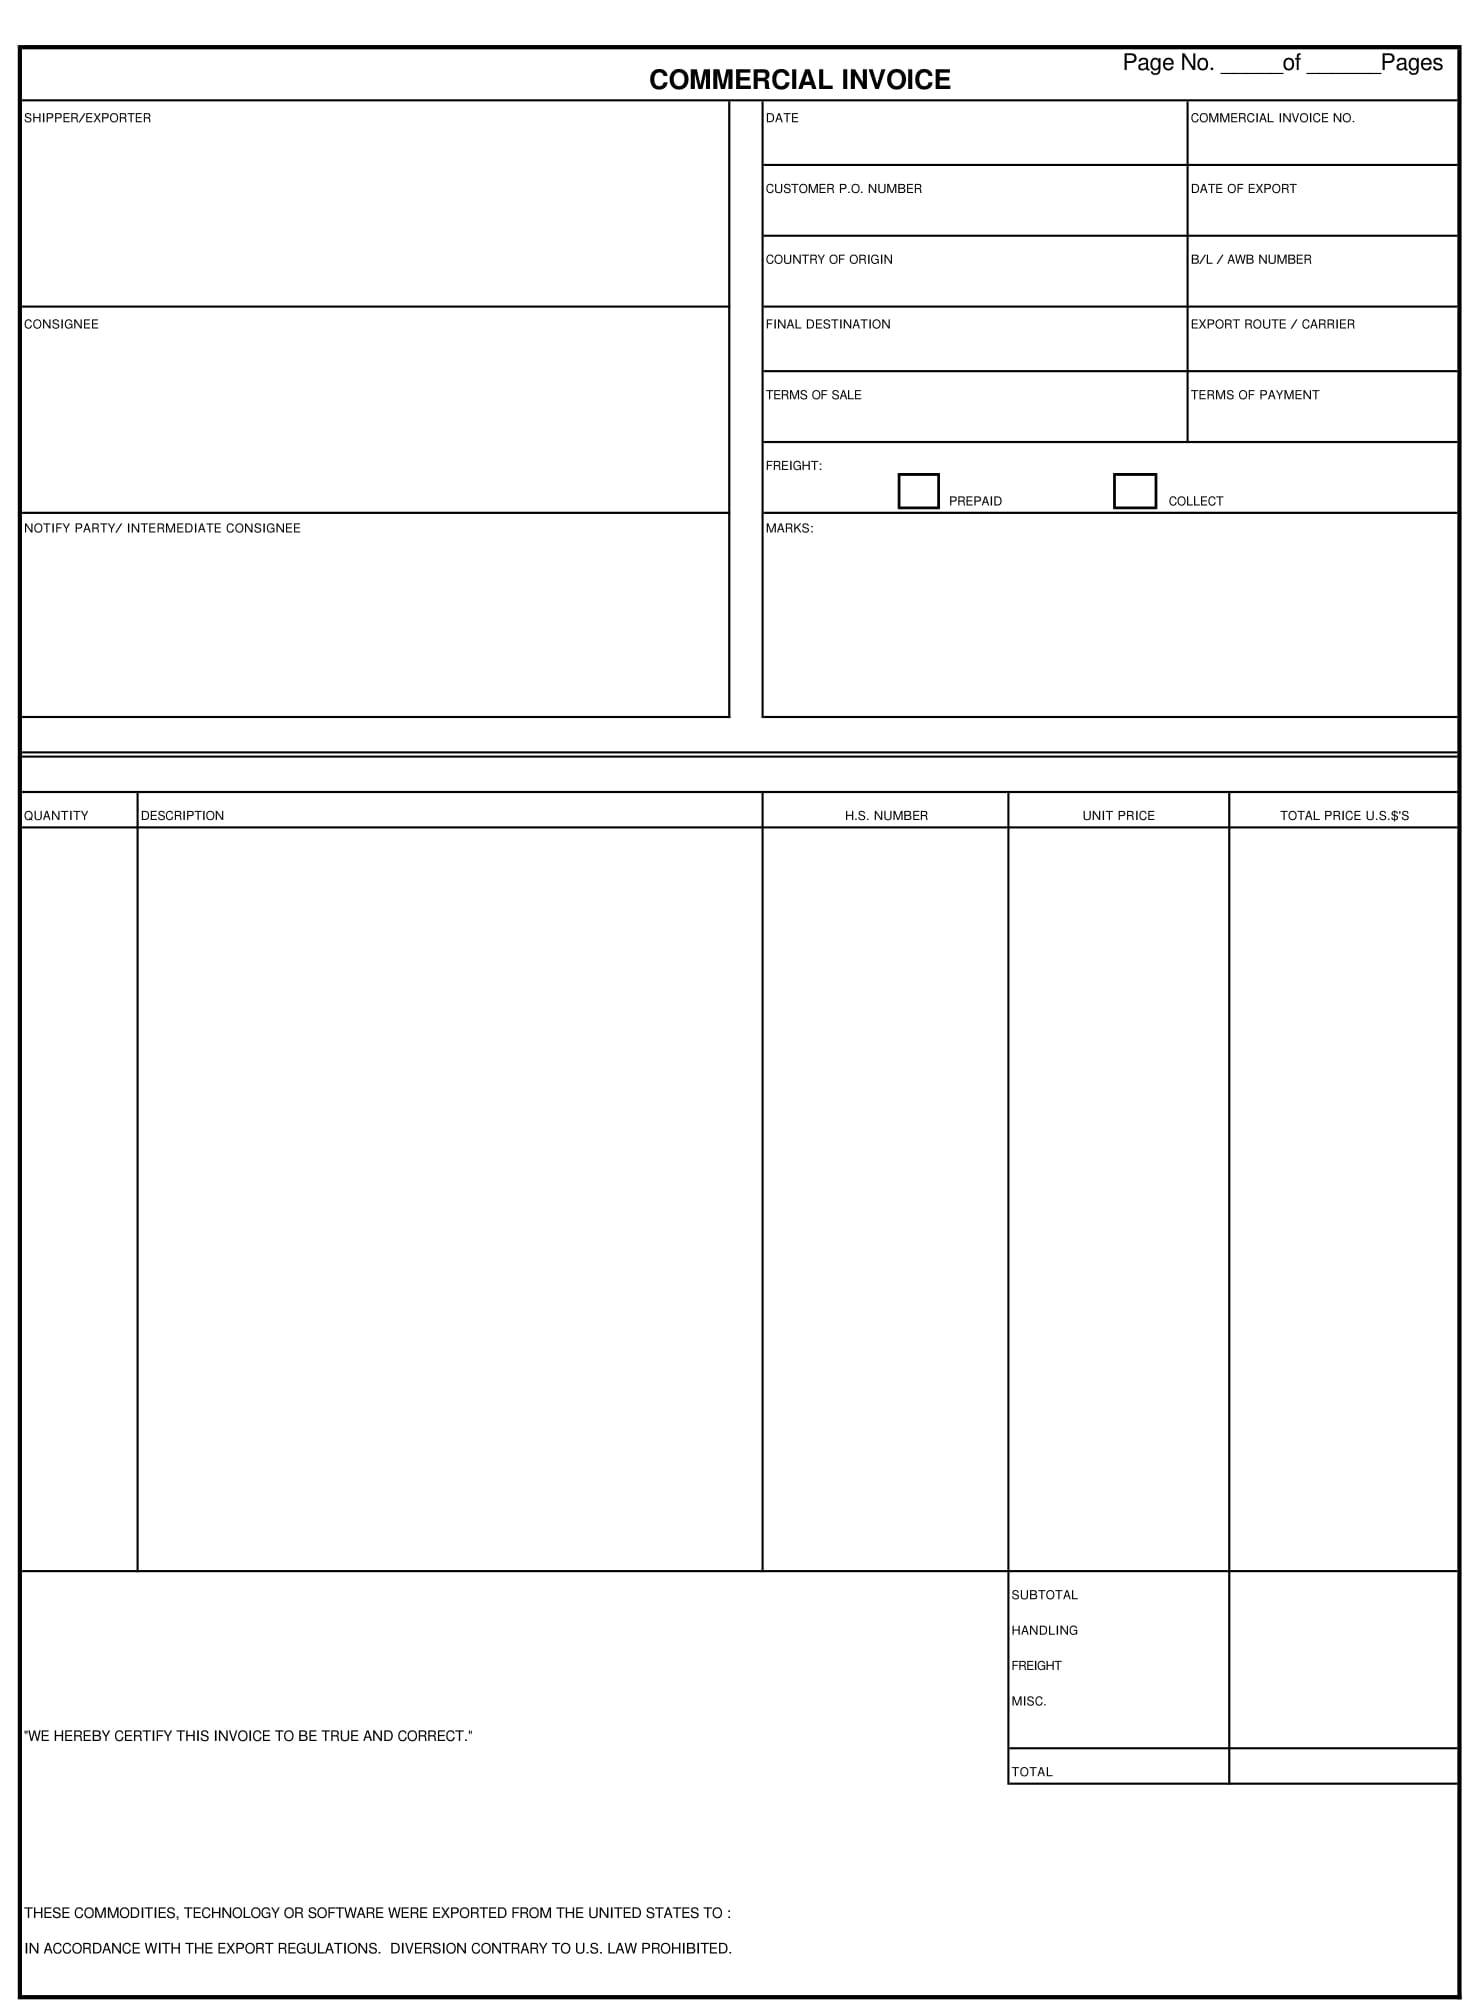 commercial invoice fill in